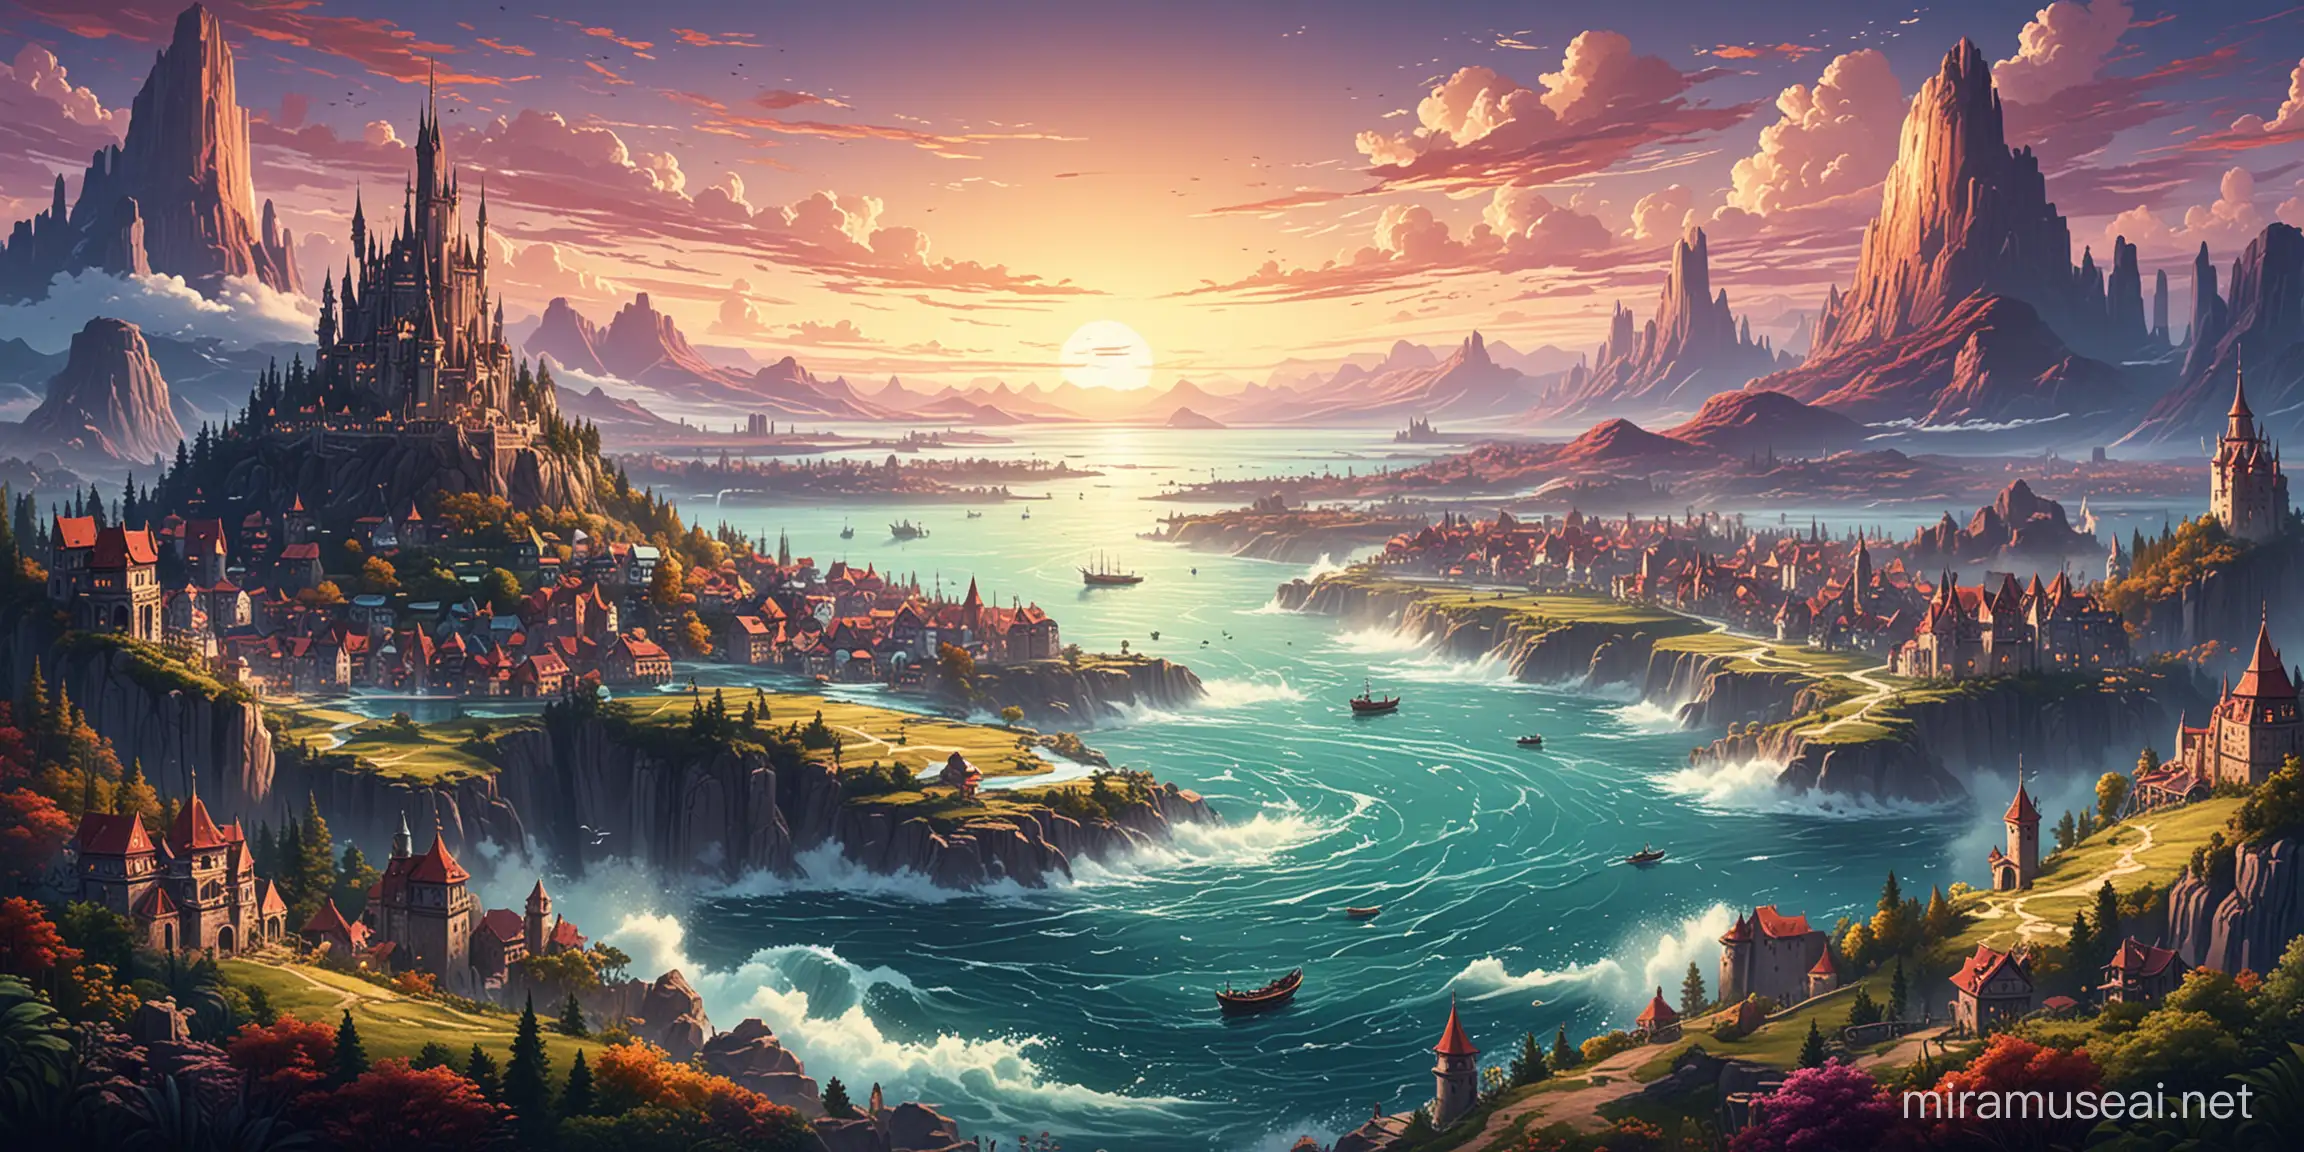 vector art of fantasy land with a distant city on a big river flowing into an ocean
